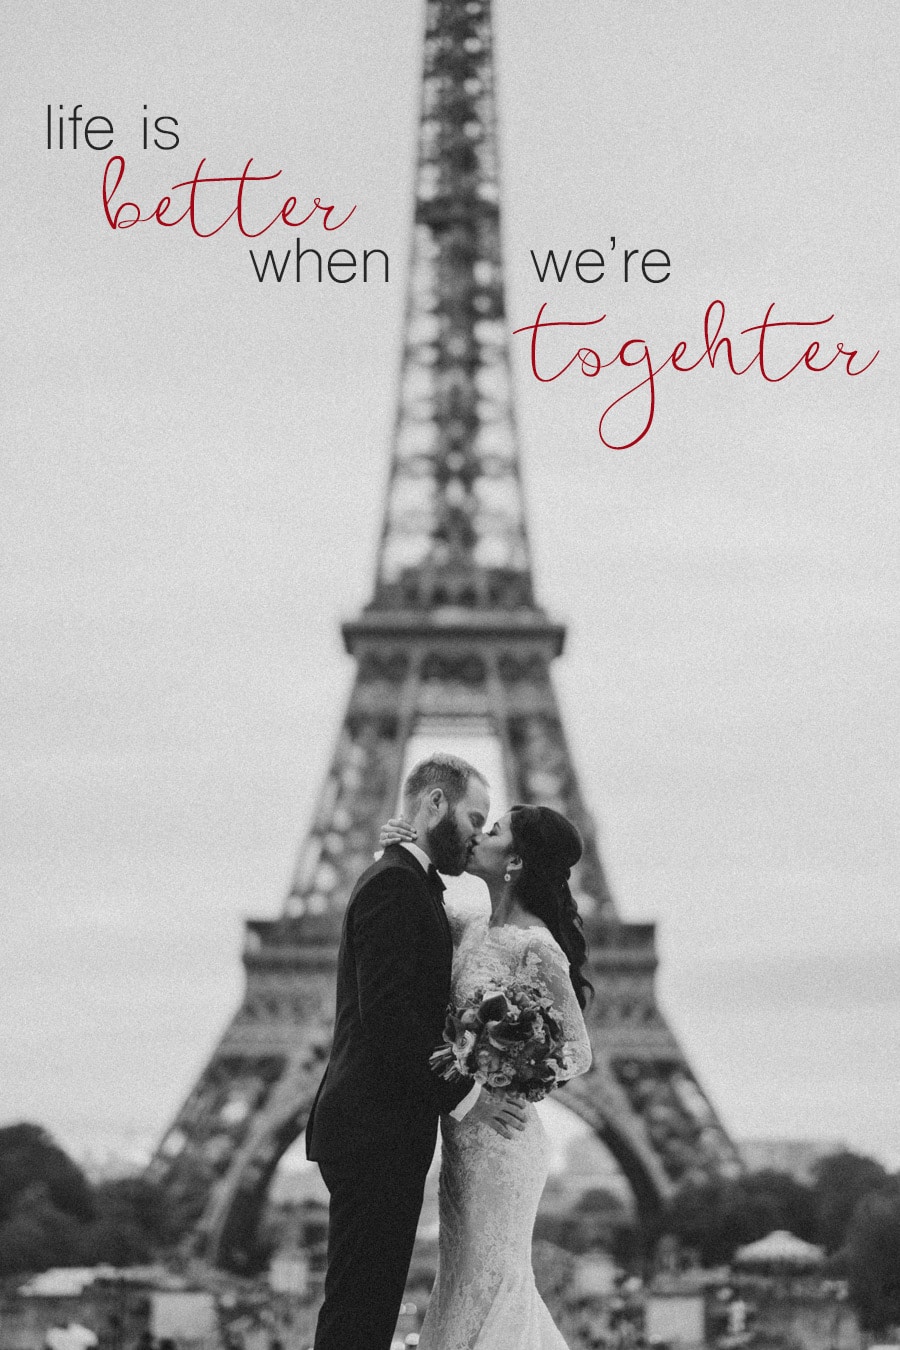 Best Love Quotes to Say I Love You